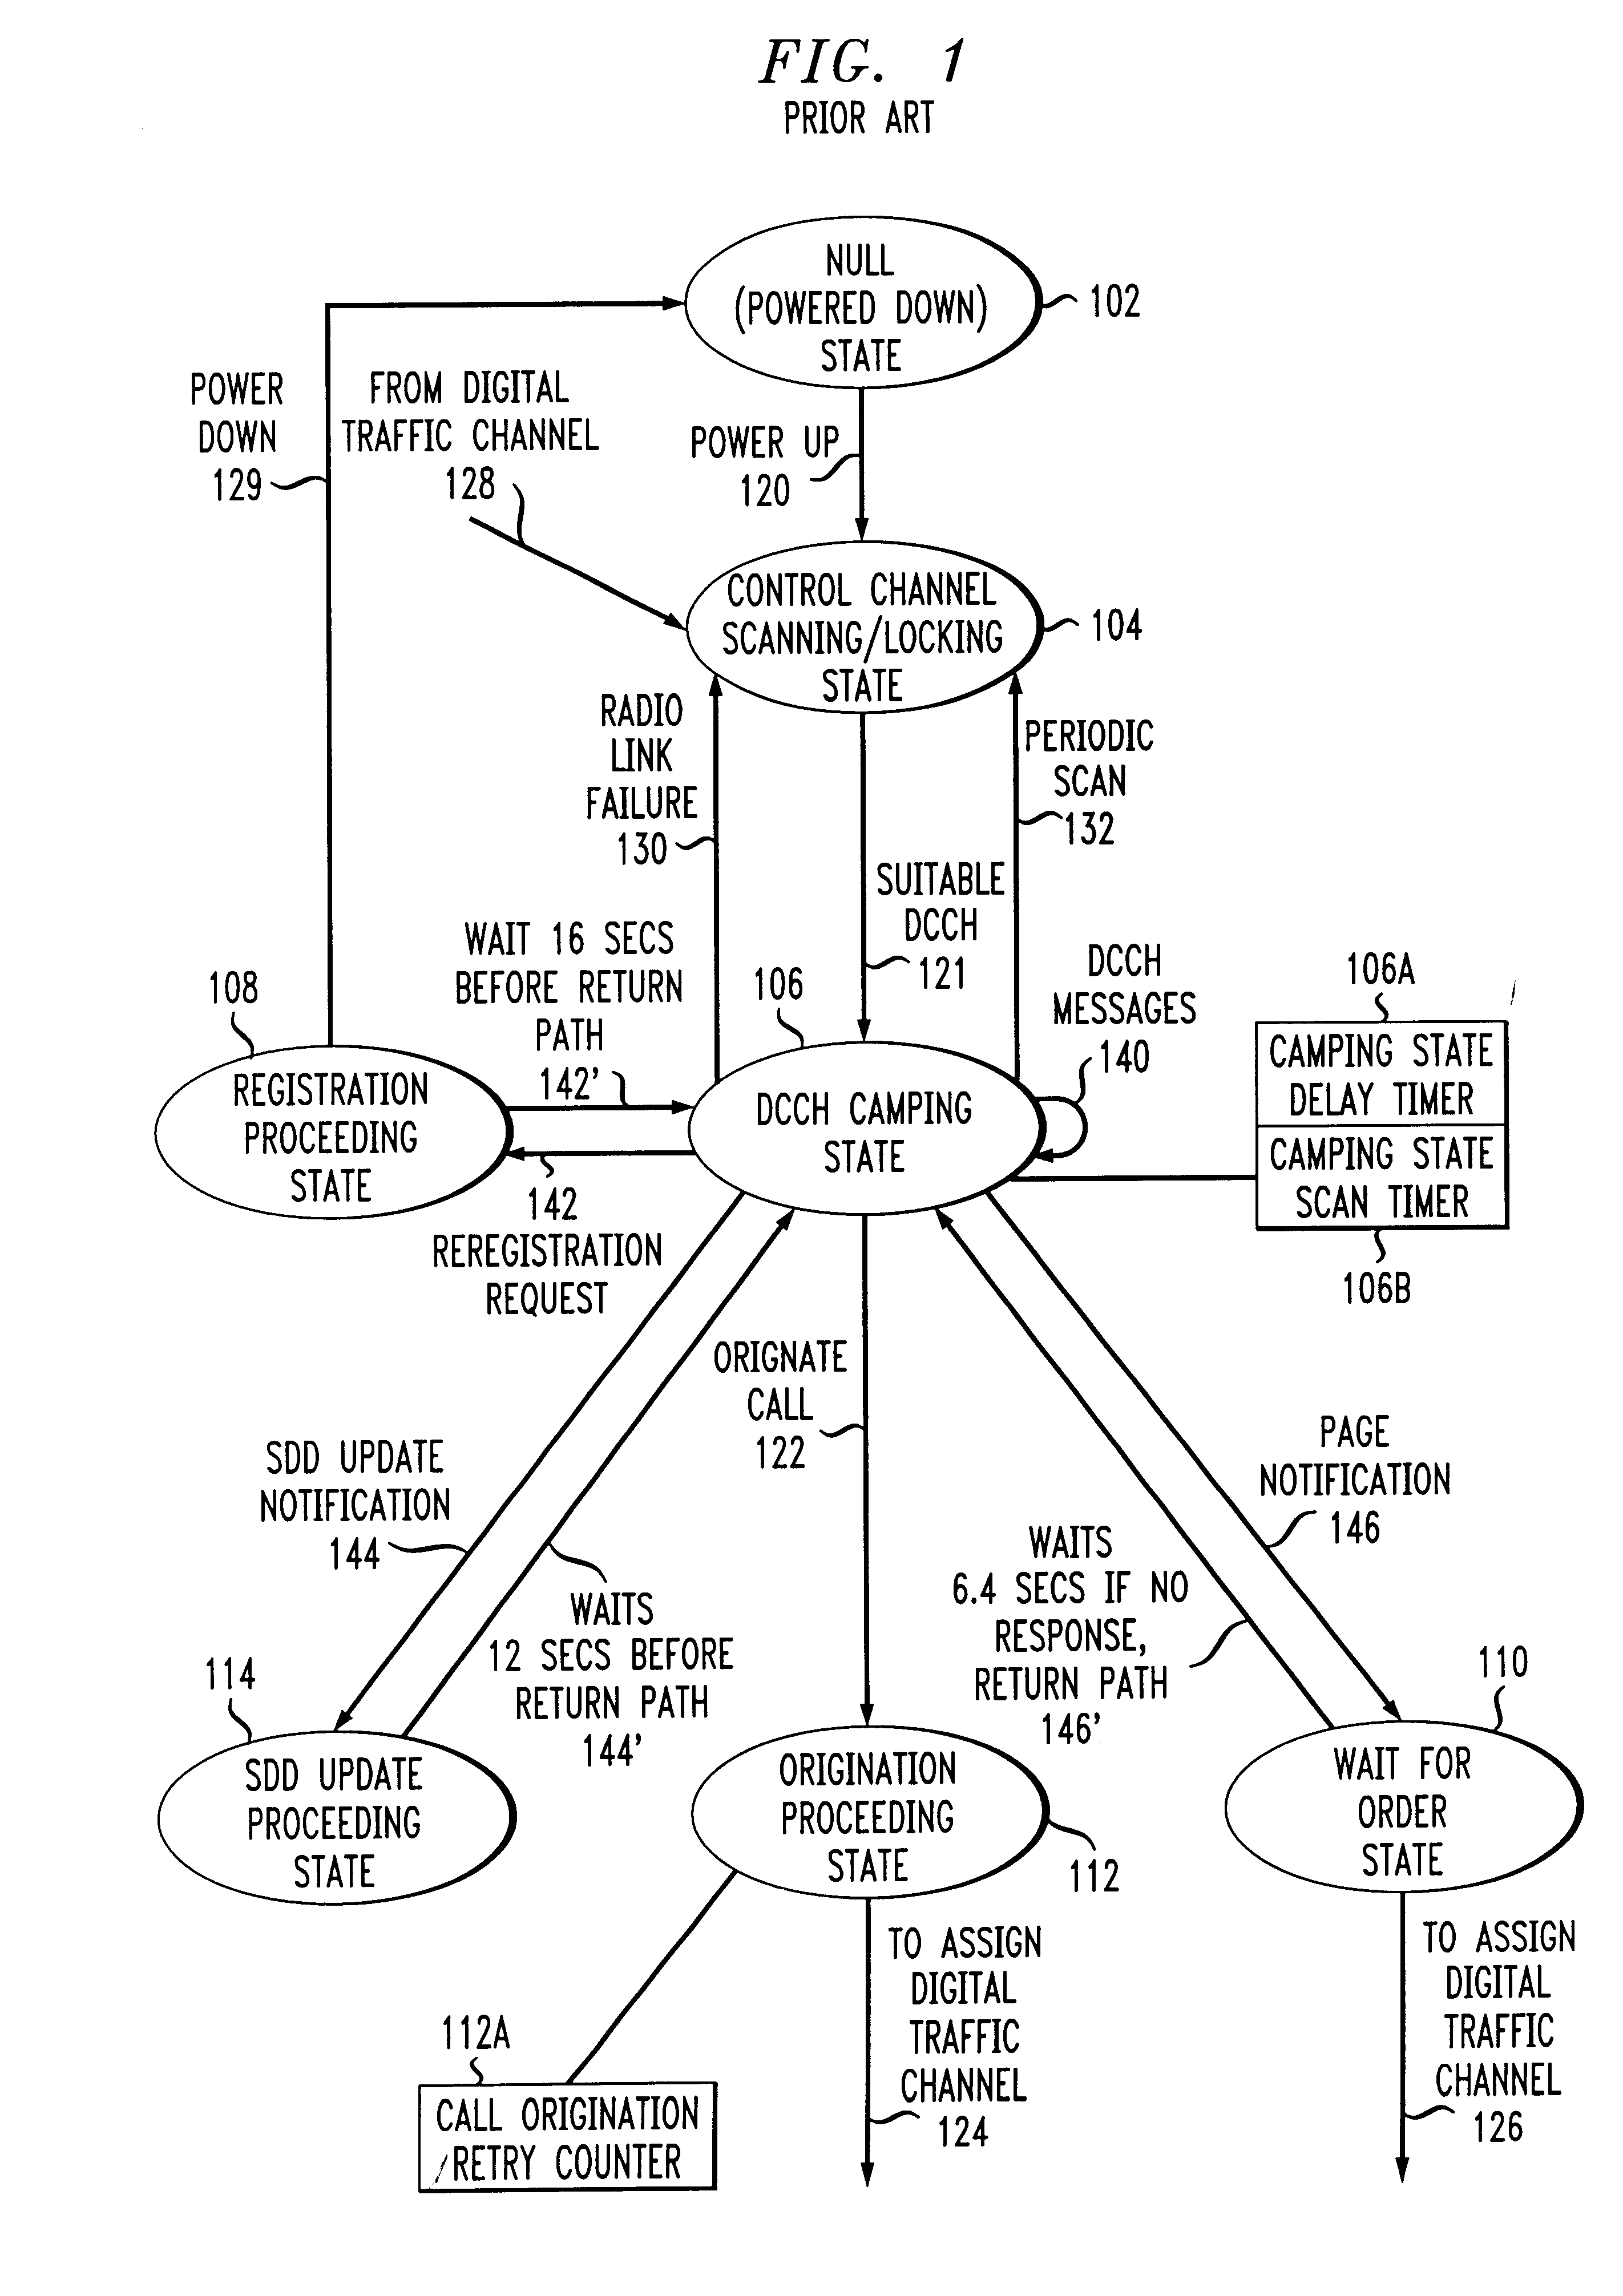 Method for uplink spectrum monitoring for sparse overlay TDMA systems